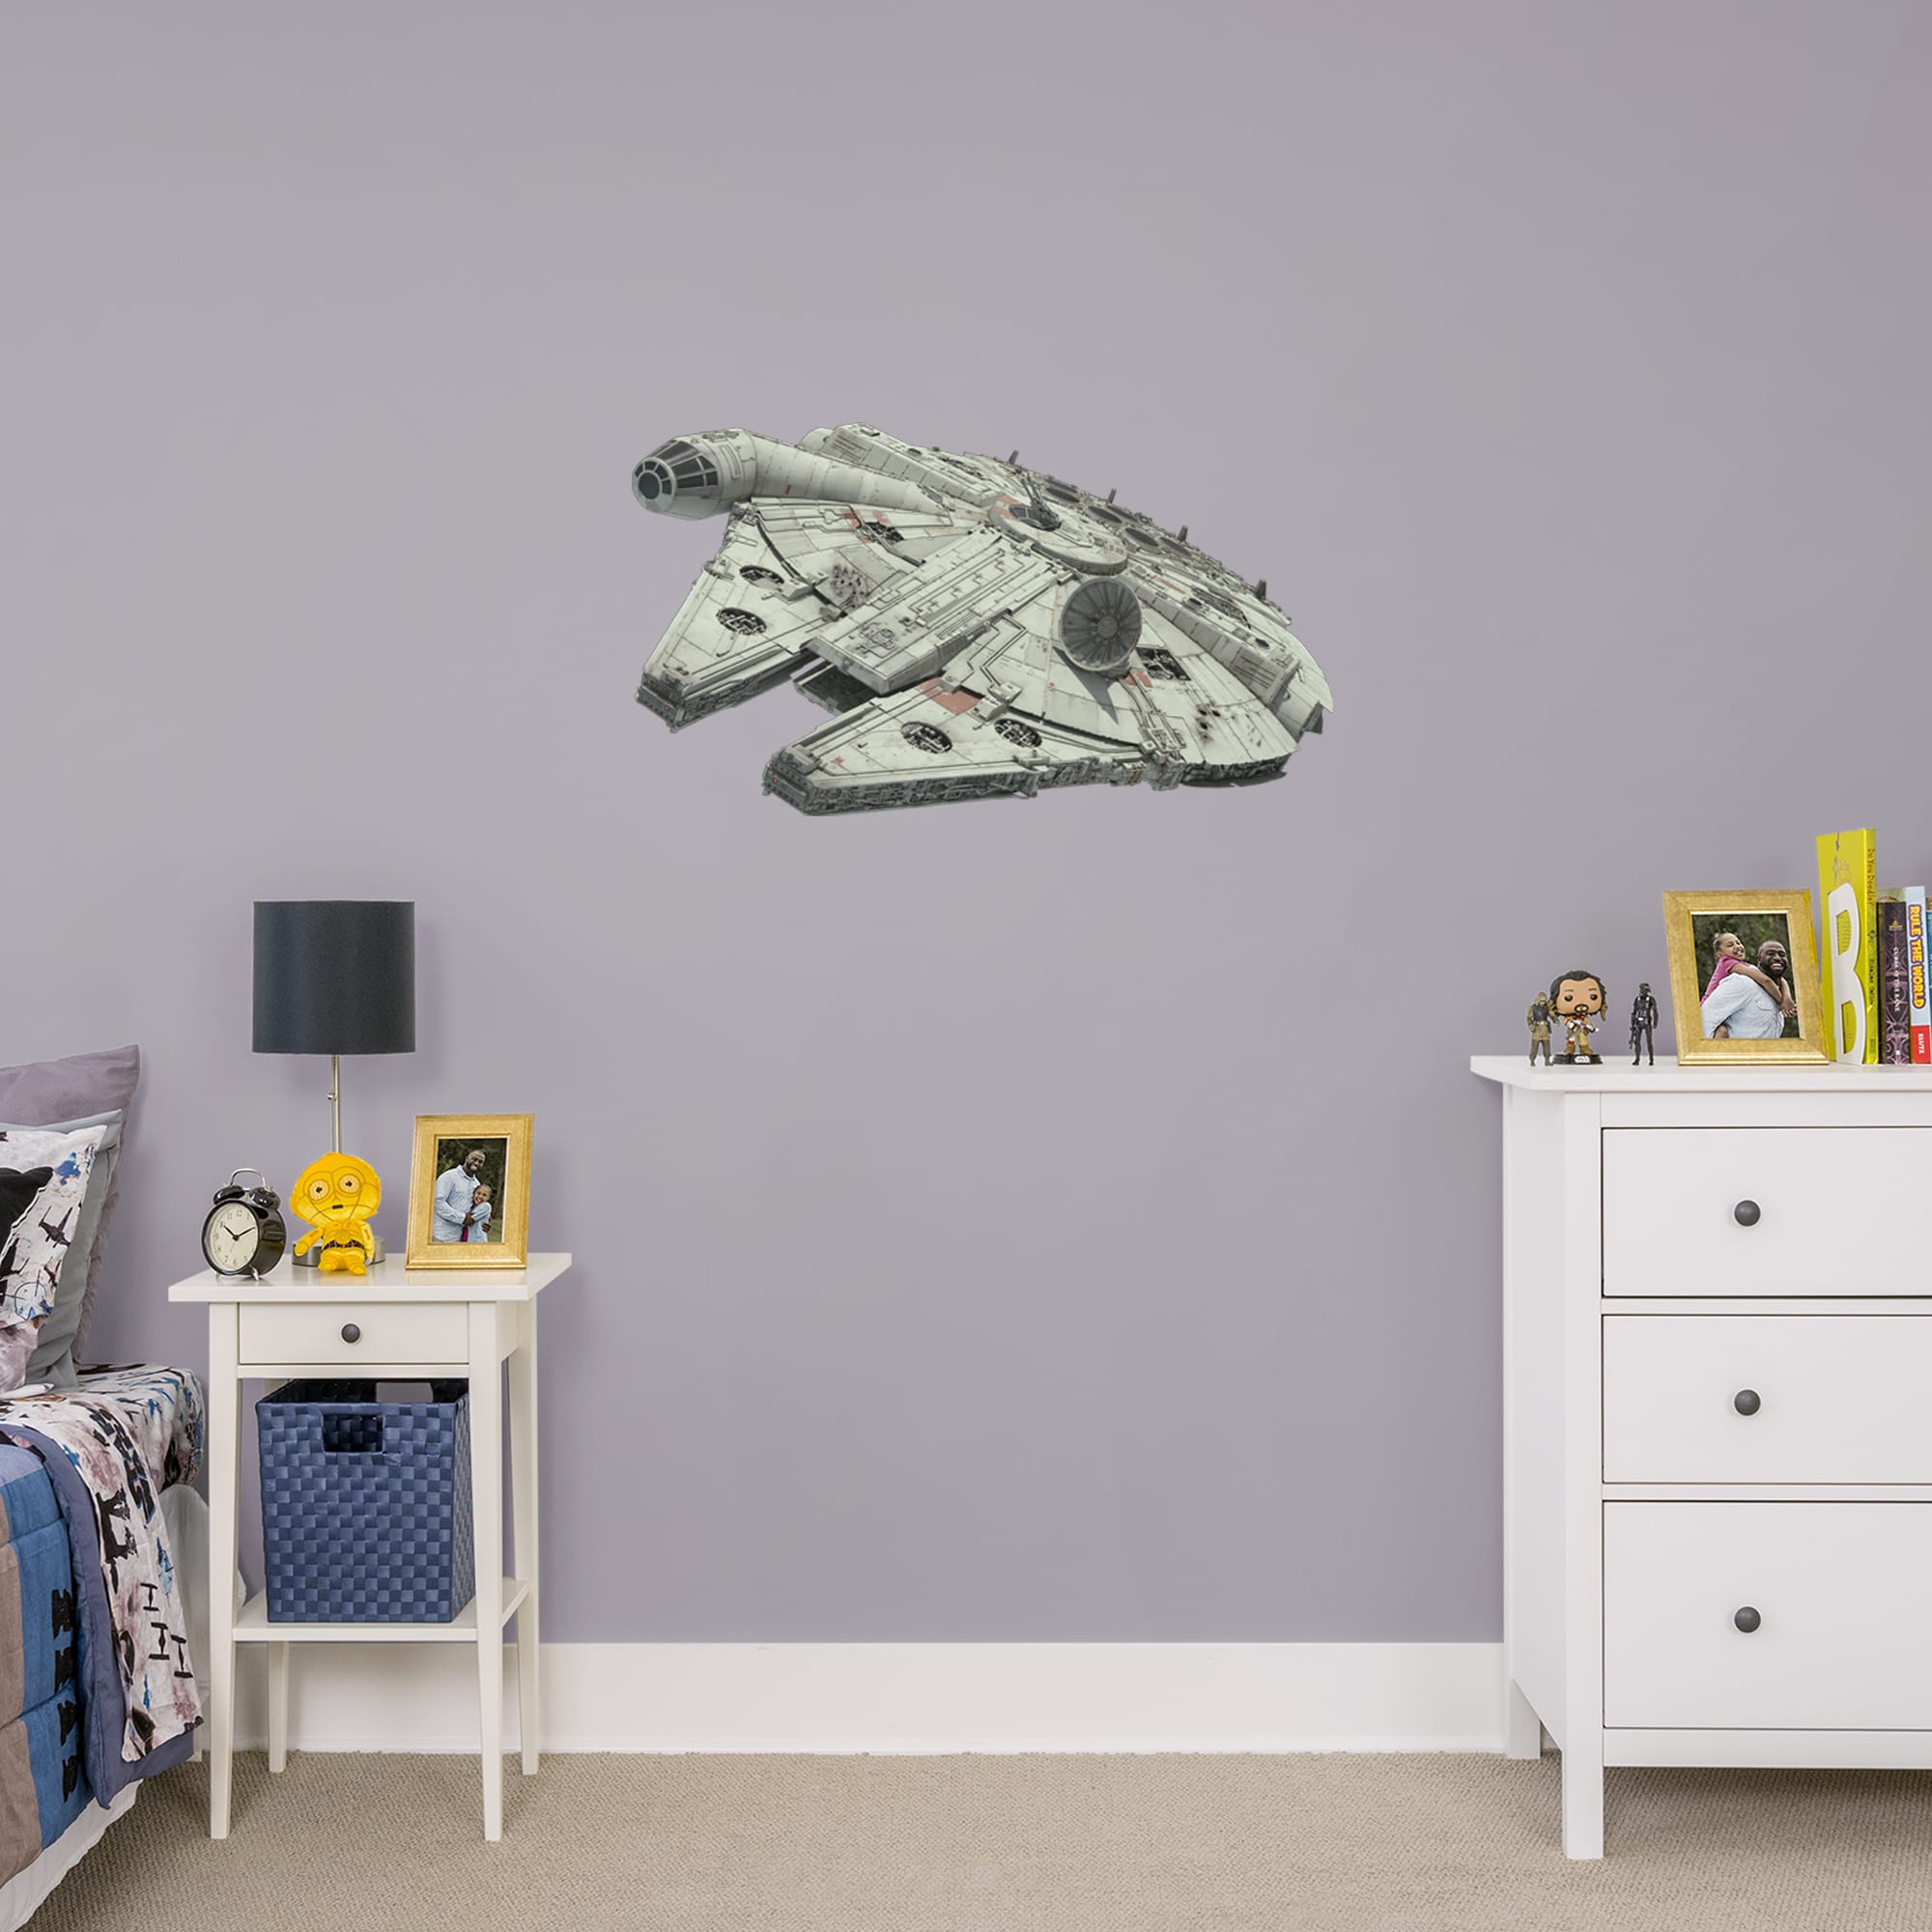 Millennium Falcon - Star Wars: The Rise of Skywalker - Officially Licensed Removable Wall Decal